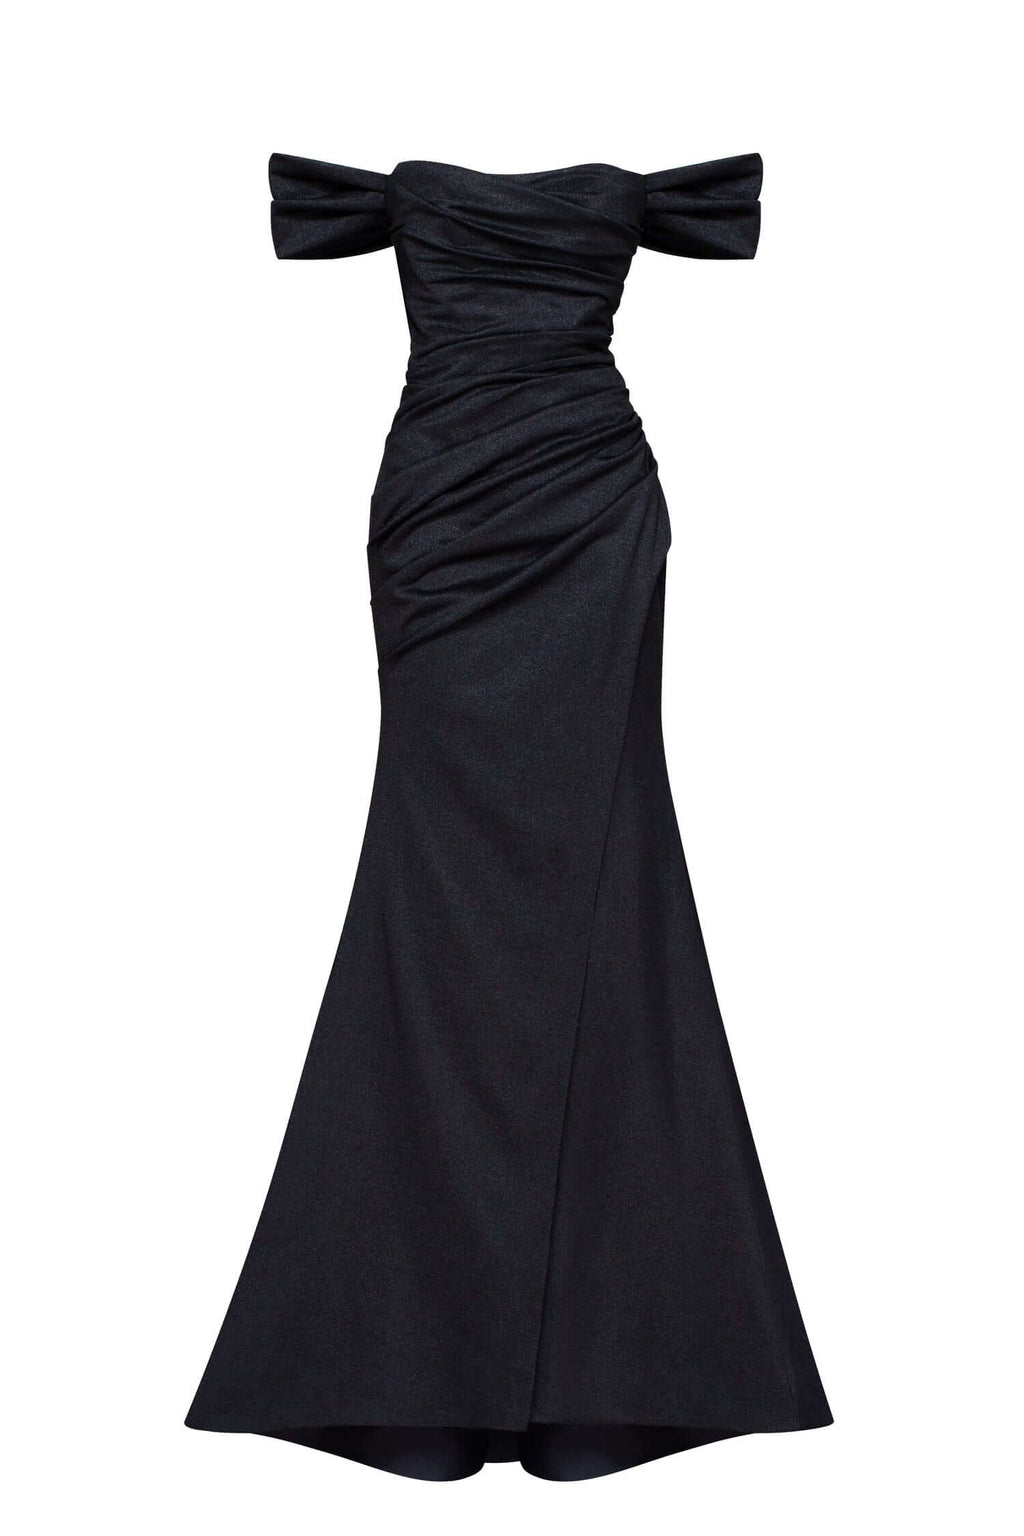 Black Silk Maxi Dress With Long Sleeves and Side Slit, Black Silk